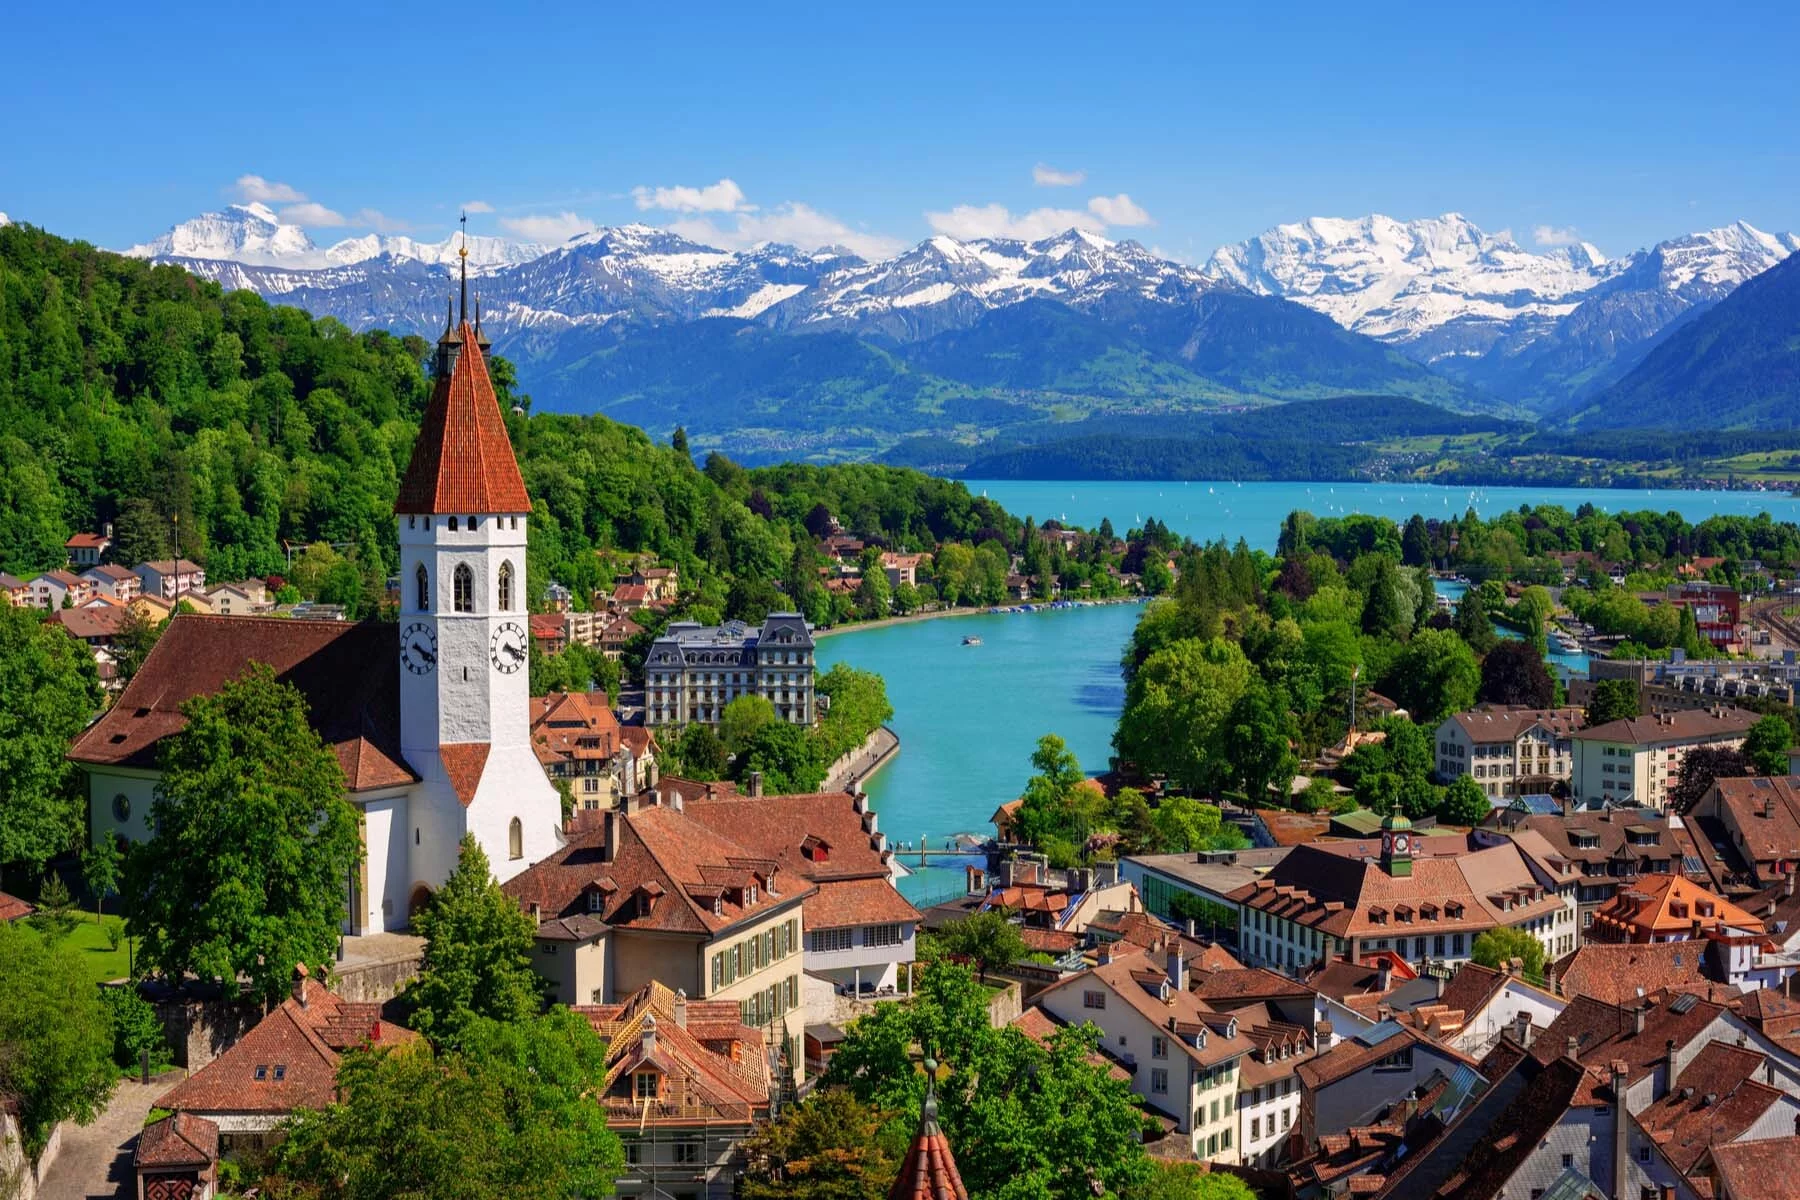 View of Thun with mountains